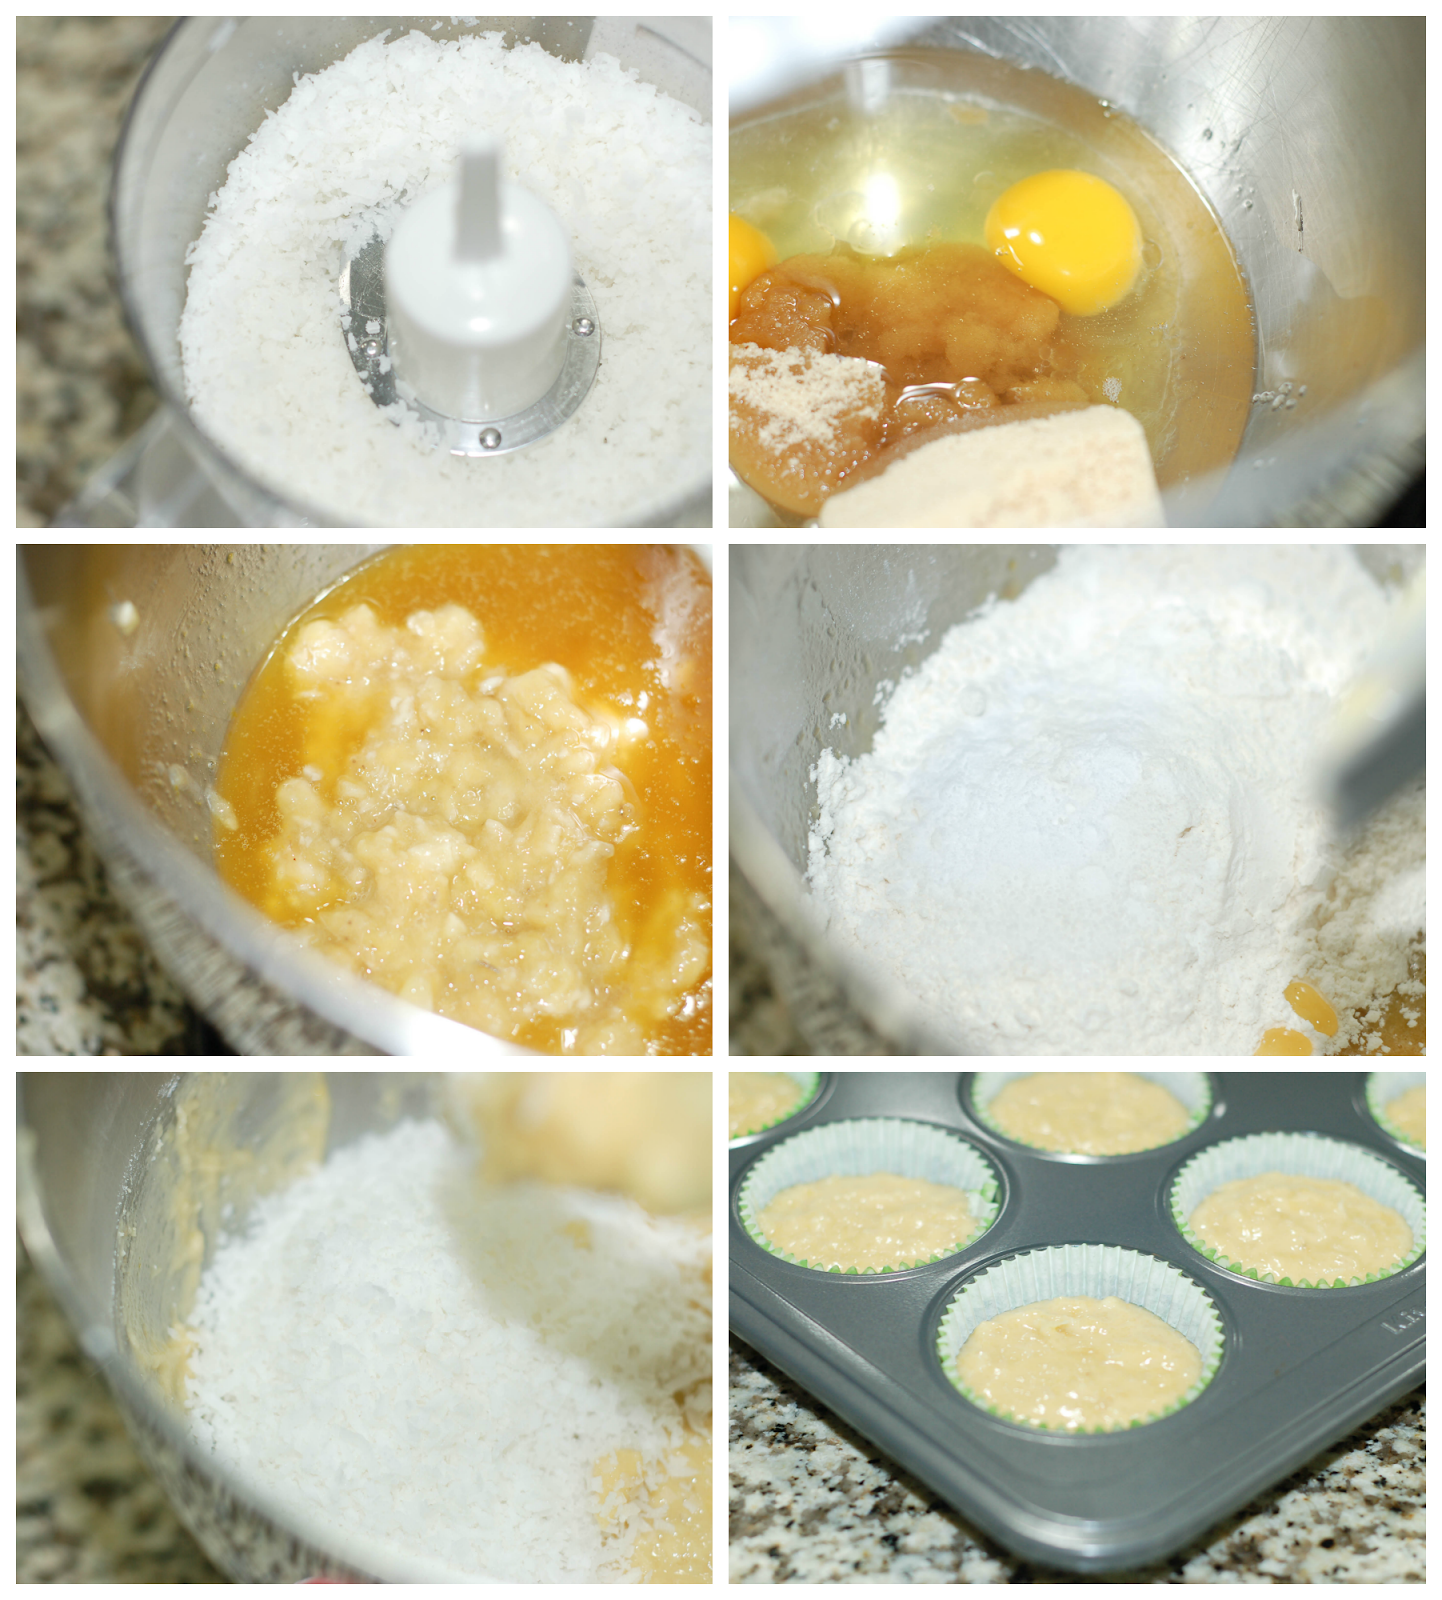 Making Coconut Banana Muffins by The Sweet Chick